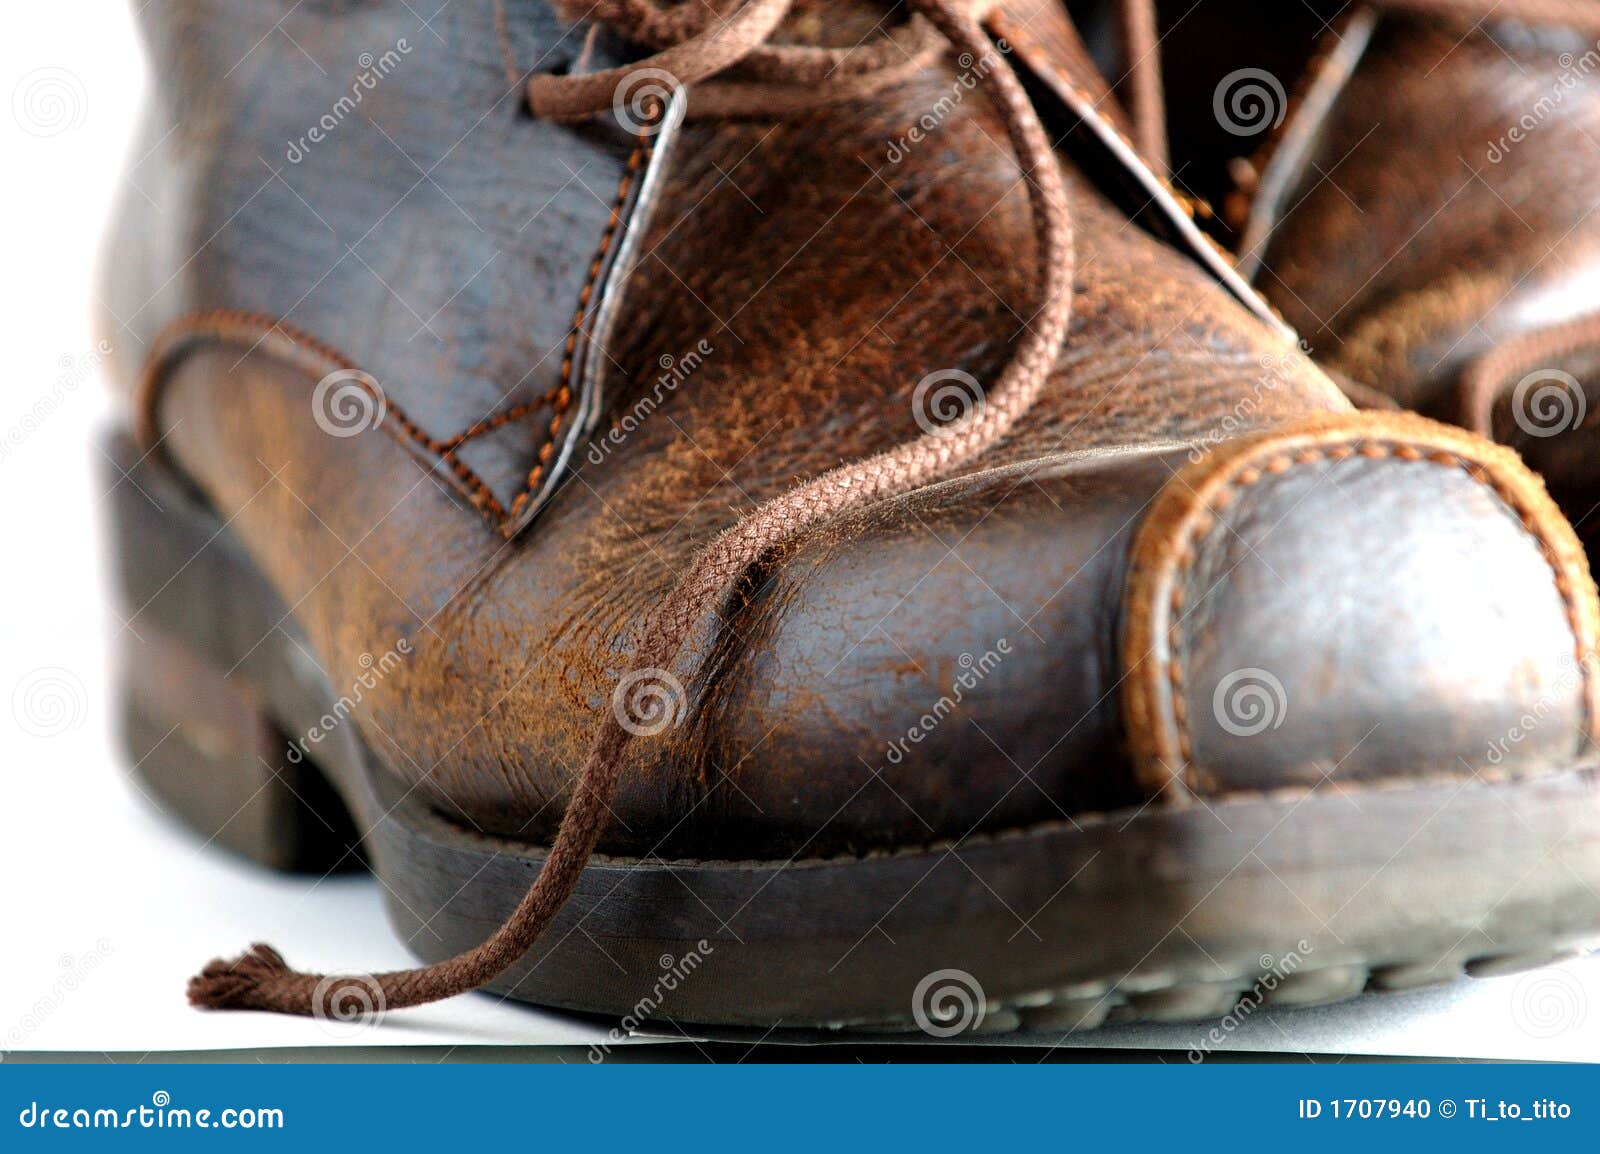 Leather shoes stock photo. Image of foot, rugged, boots - 1707940